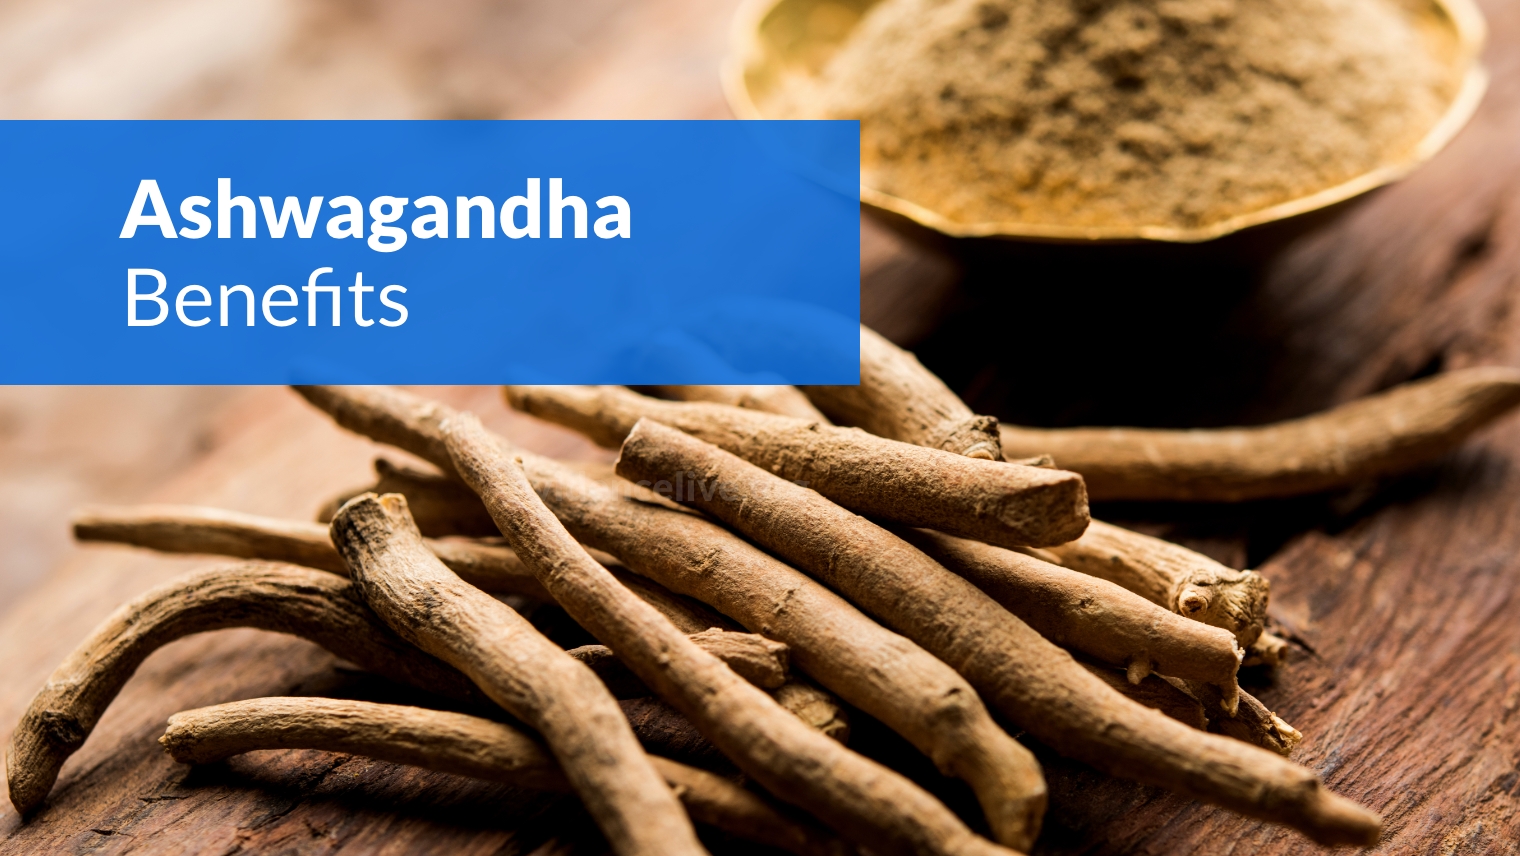 Ashwagandha: Benefits, Uses, Dosage, and Side Effects